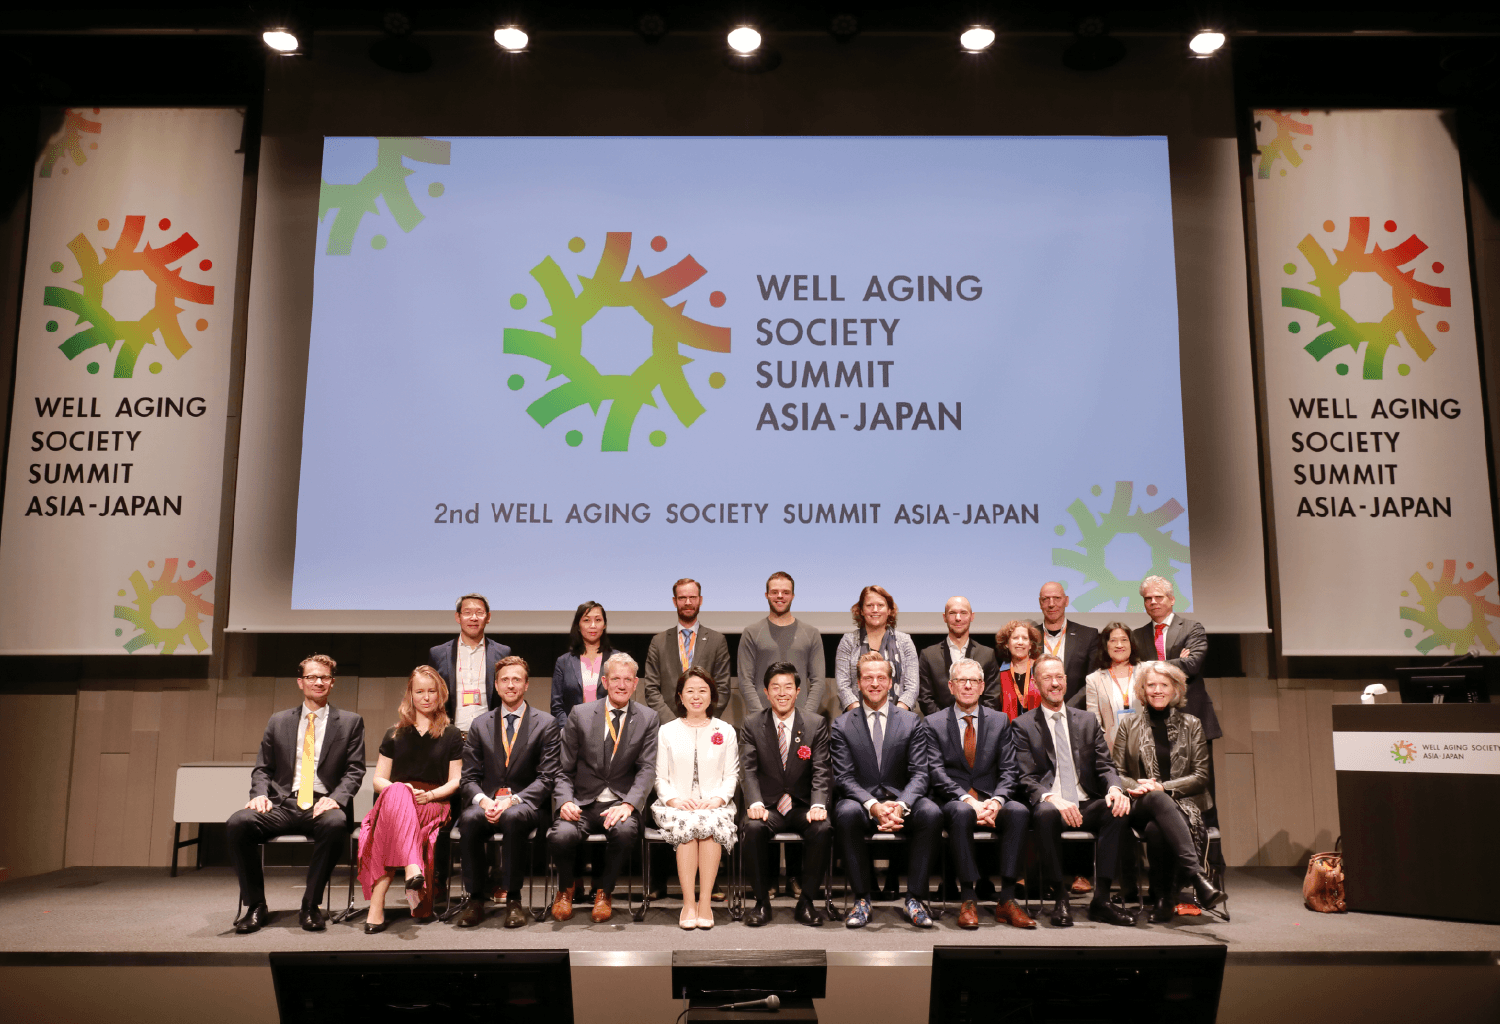 Well aging society summit japan.png